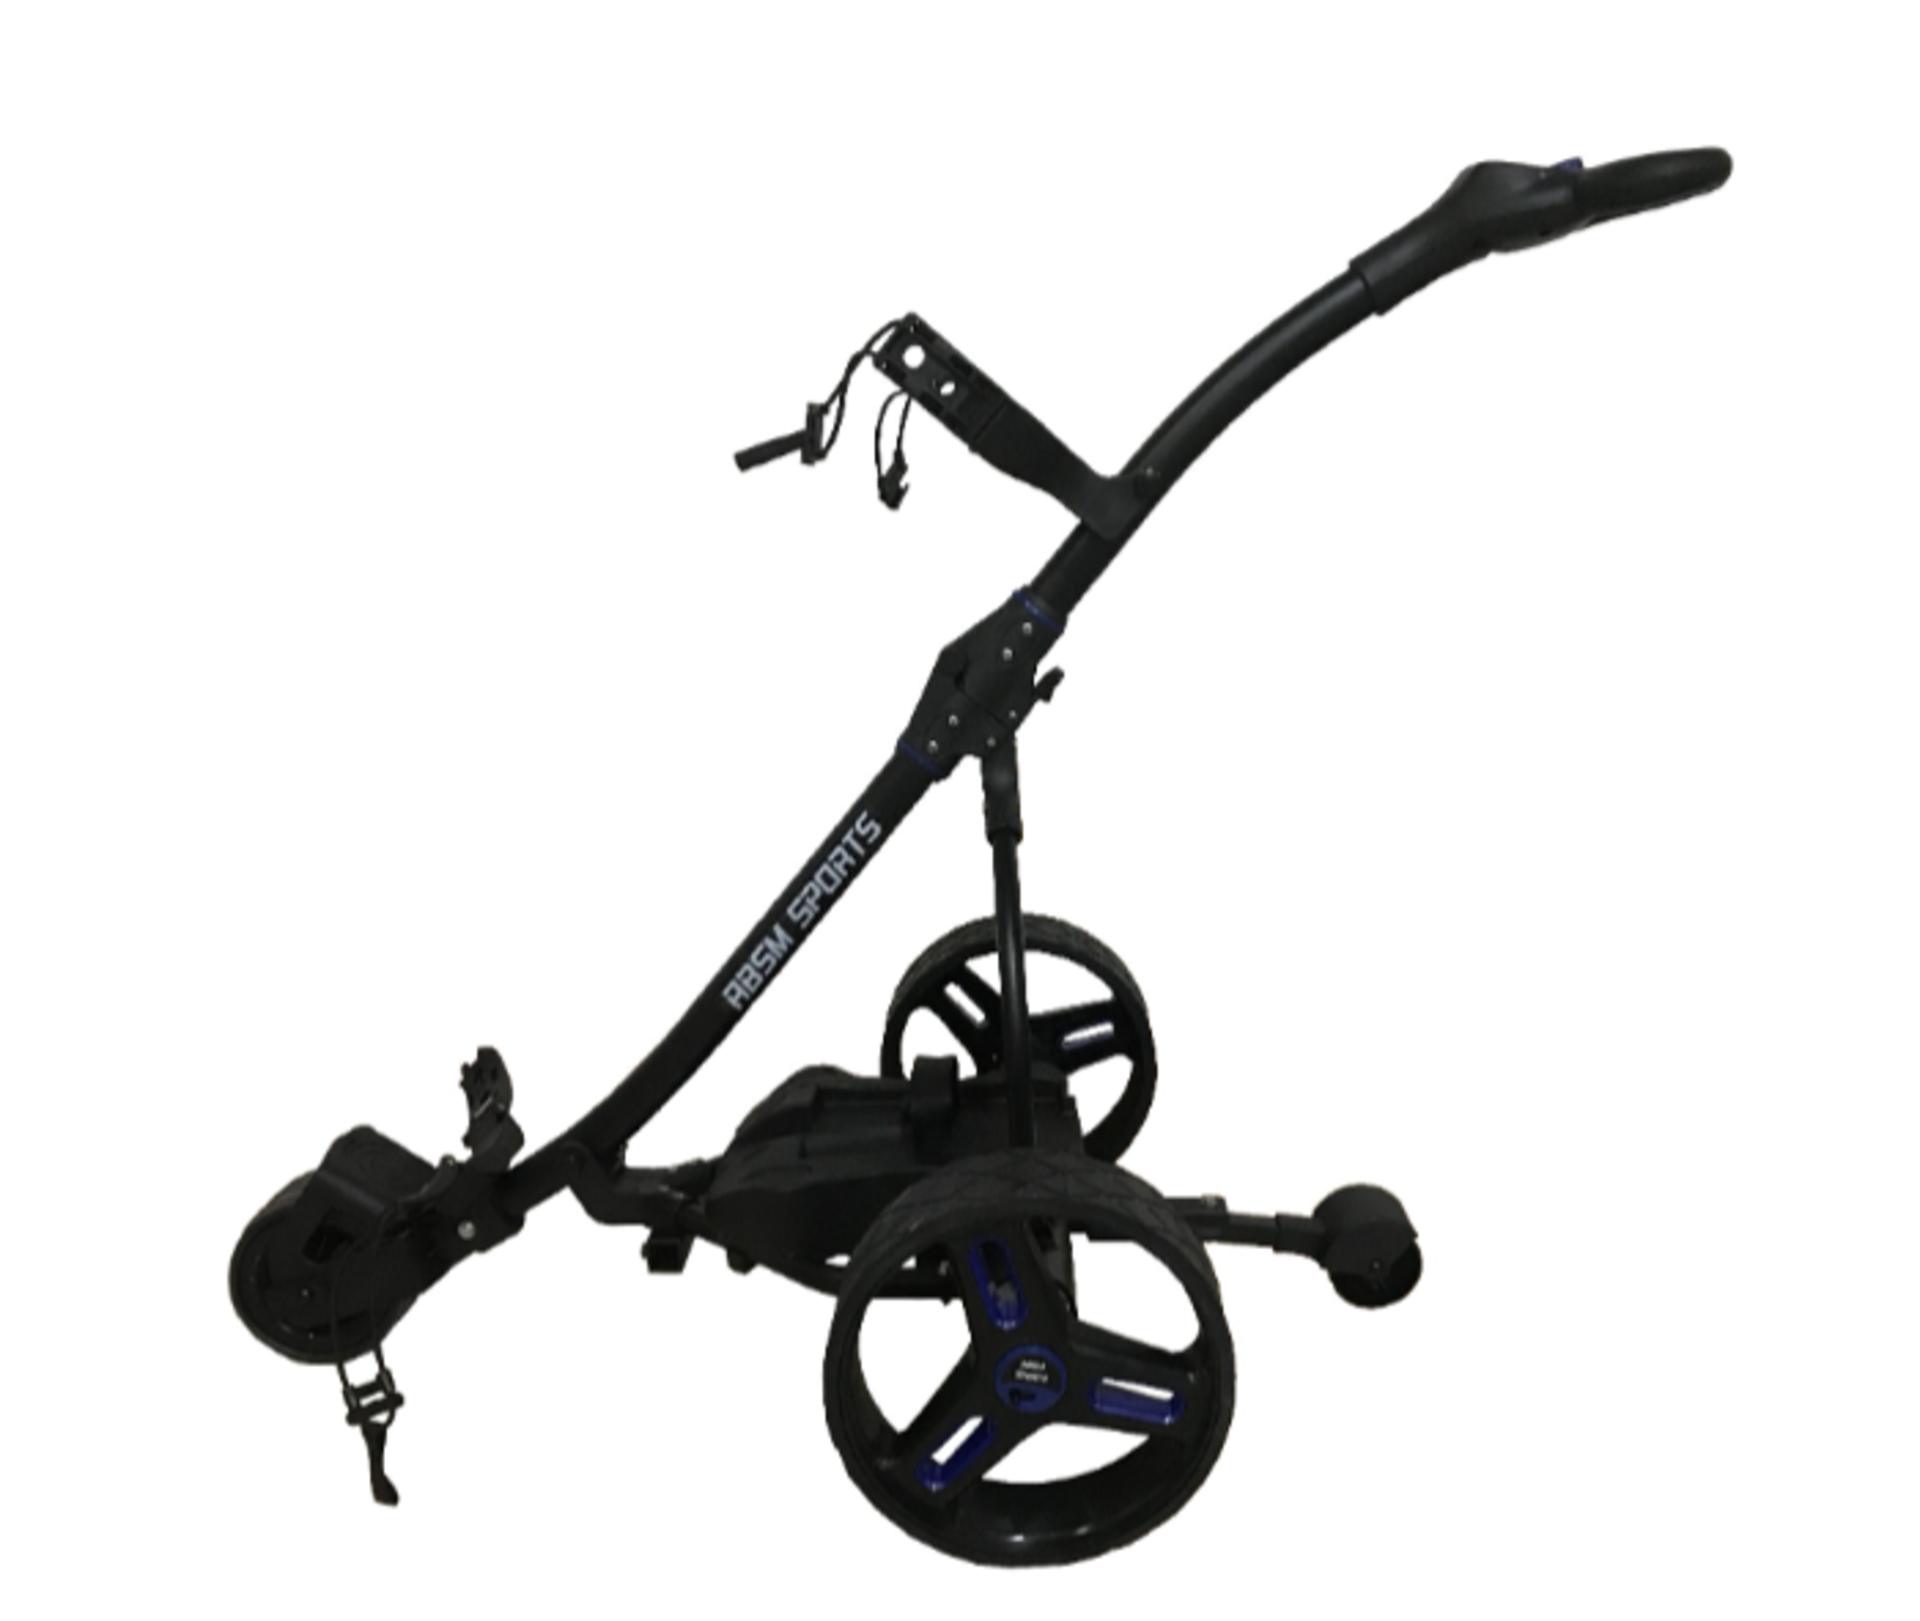 RBSM SPORTS G93R E-GOLF TROLLEY W/ REMOTE CONTROL (RENTAL UNIT) (TESTED - WORKING) (NEW COST $1,500) - Image 4 of 8